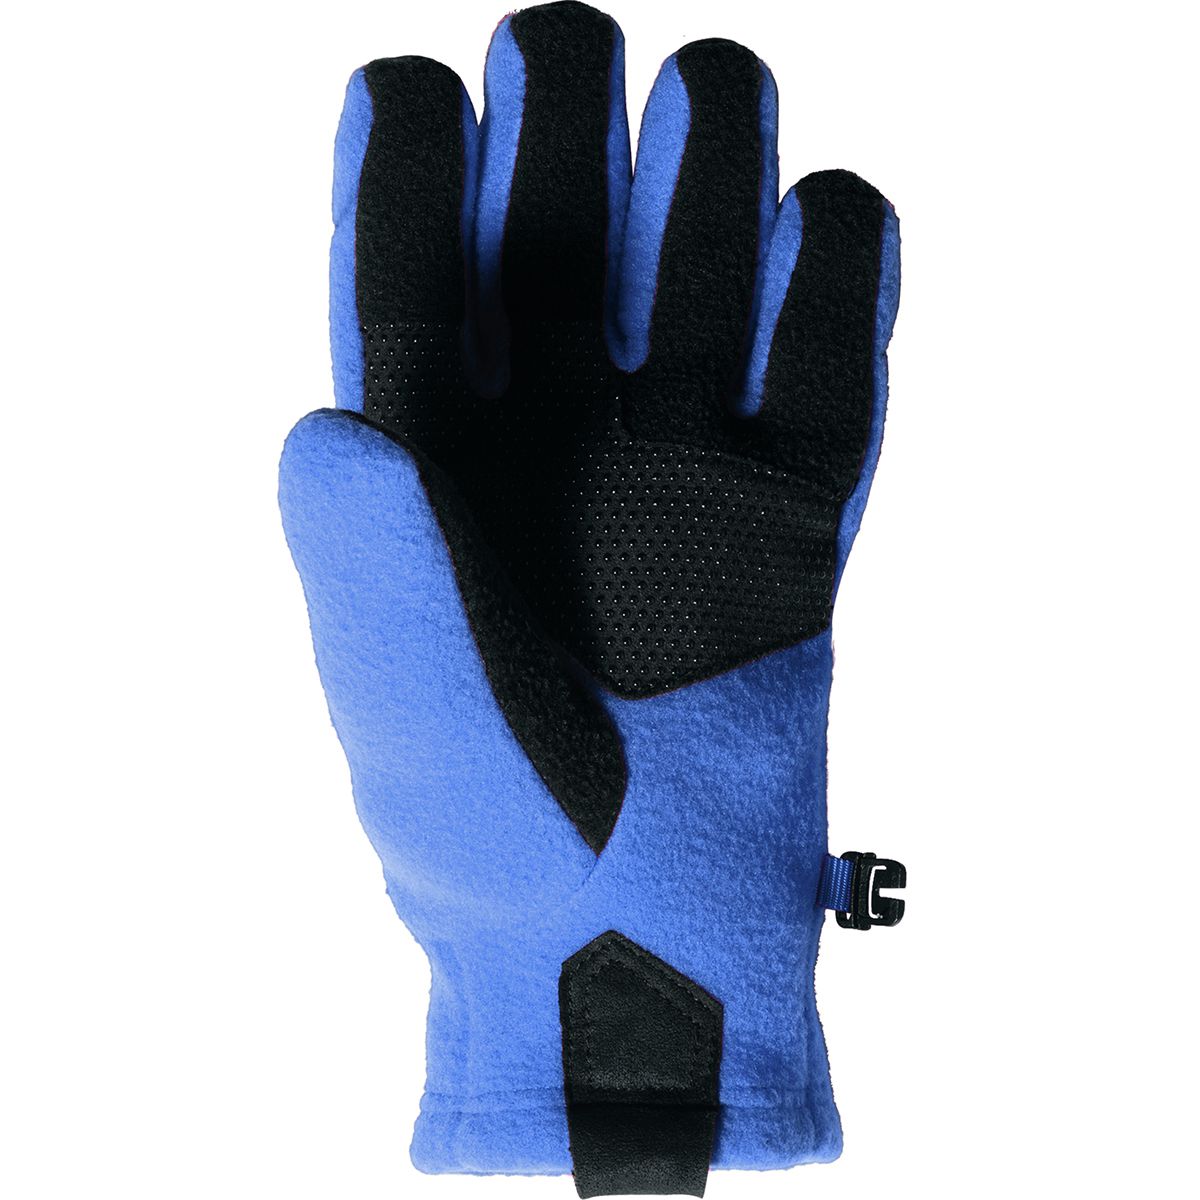 The North Face Etip Glove - Kids' | Backcountry.com